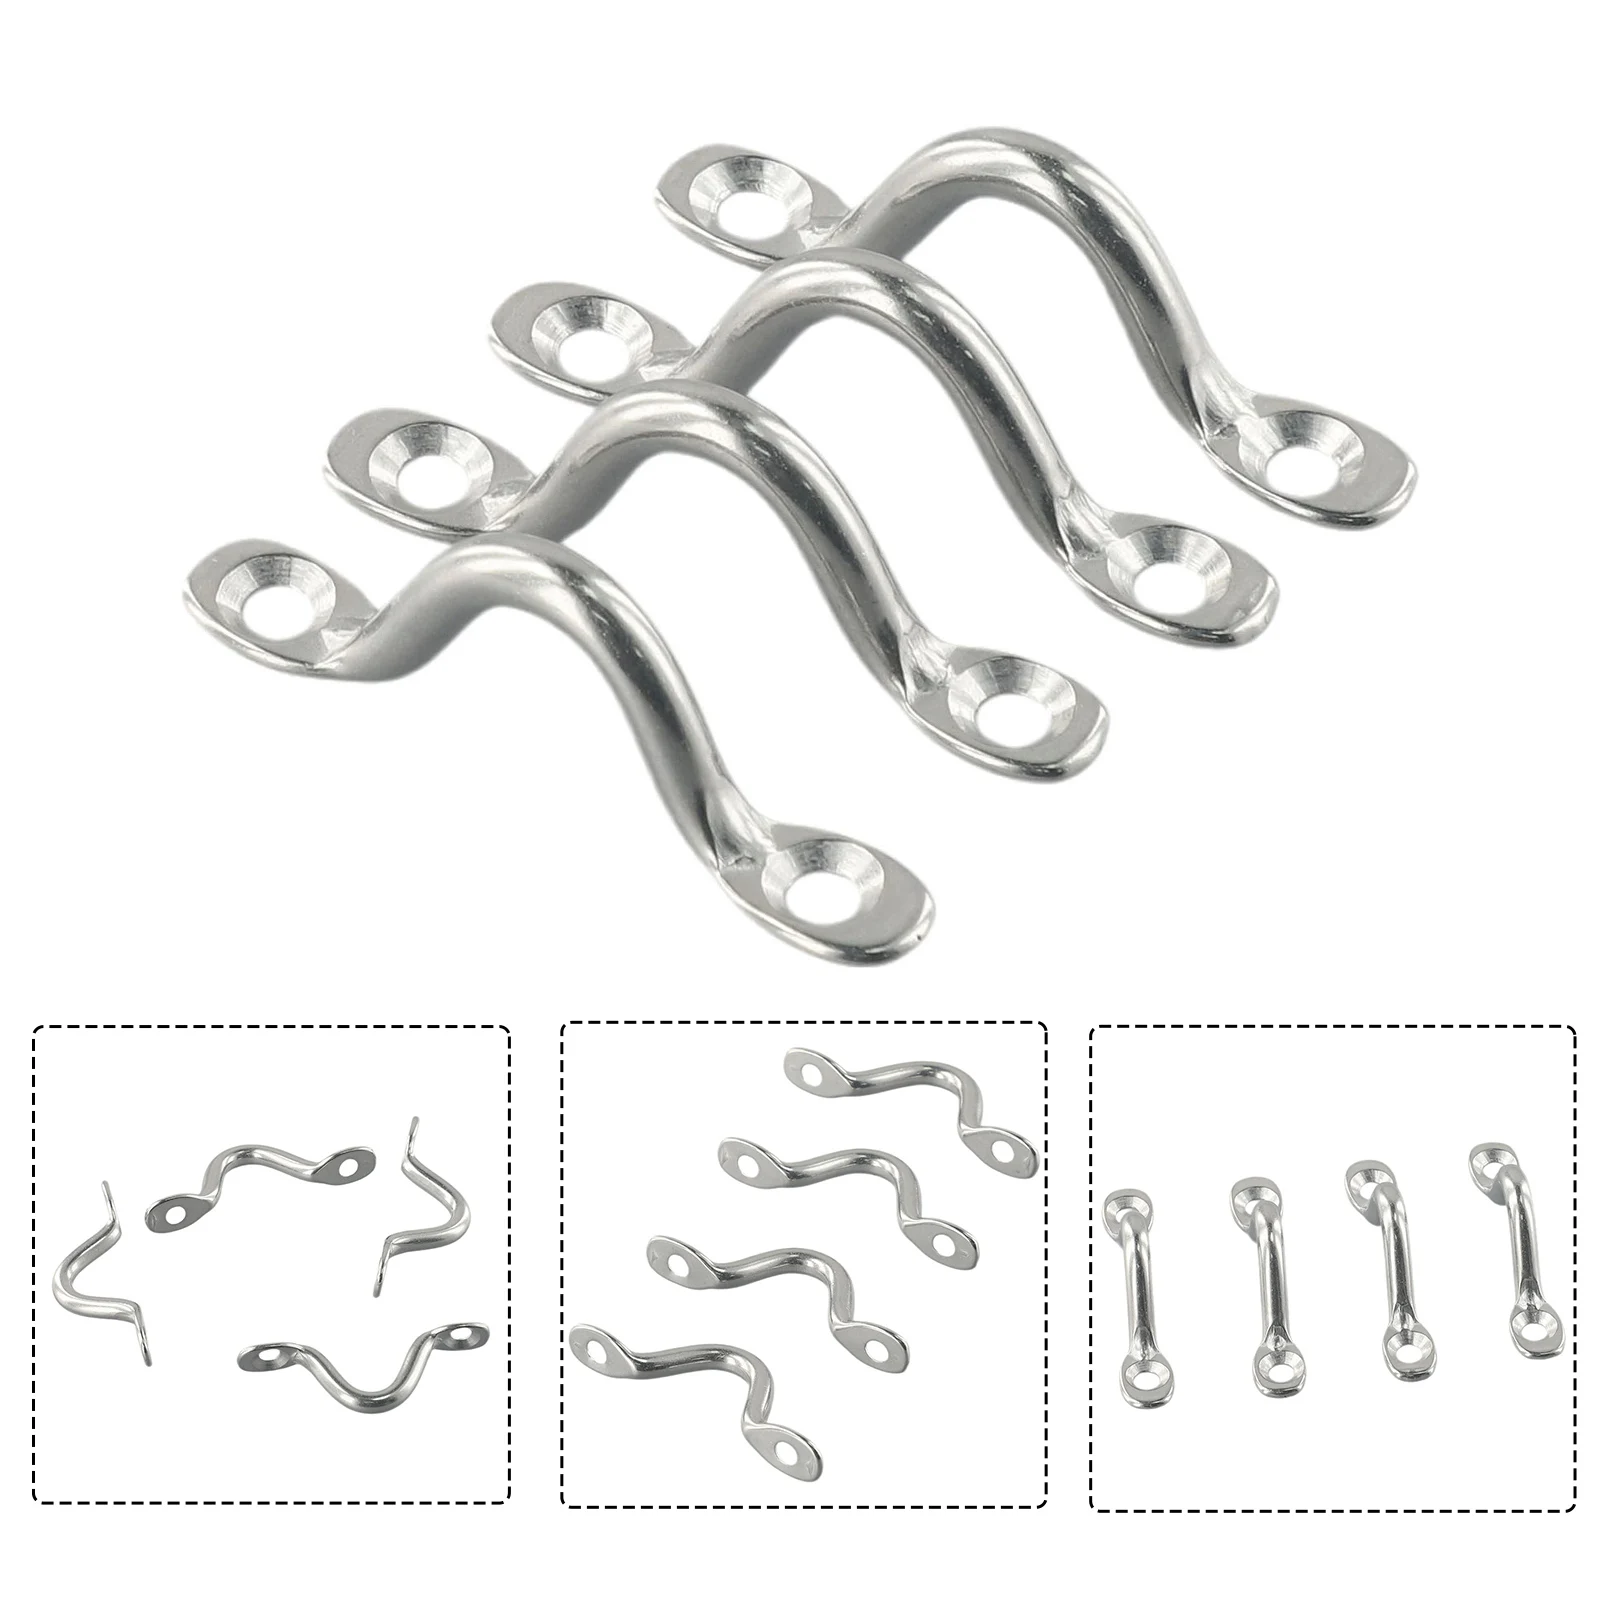 

New Practical Wire Eye Straps Handles U Shape Silver Stainless Steel Tie Down 4pcs 5mm Accessories Boat Marine